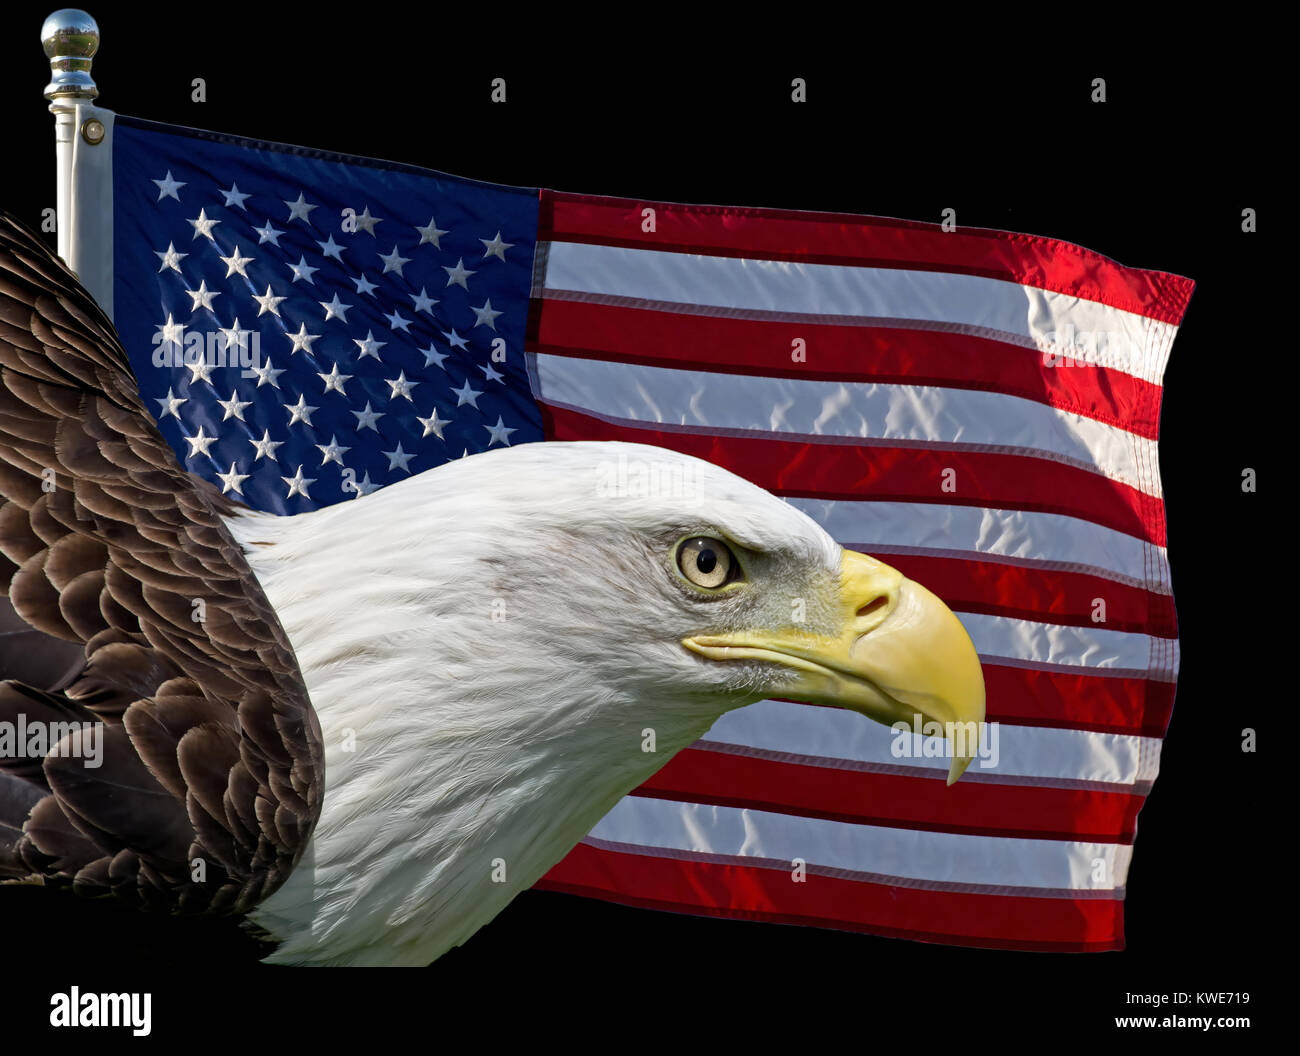 Composite image of two United States symbols the American Flag and the Bald Eagle. Stock Photo